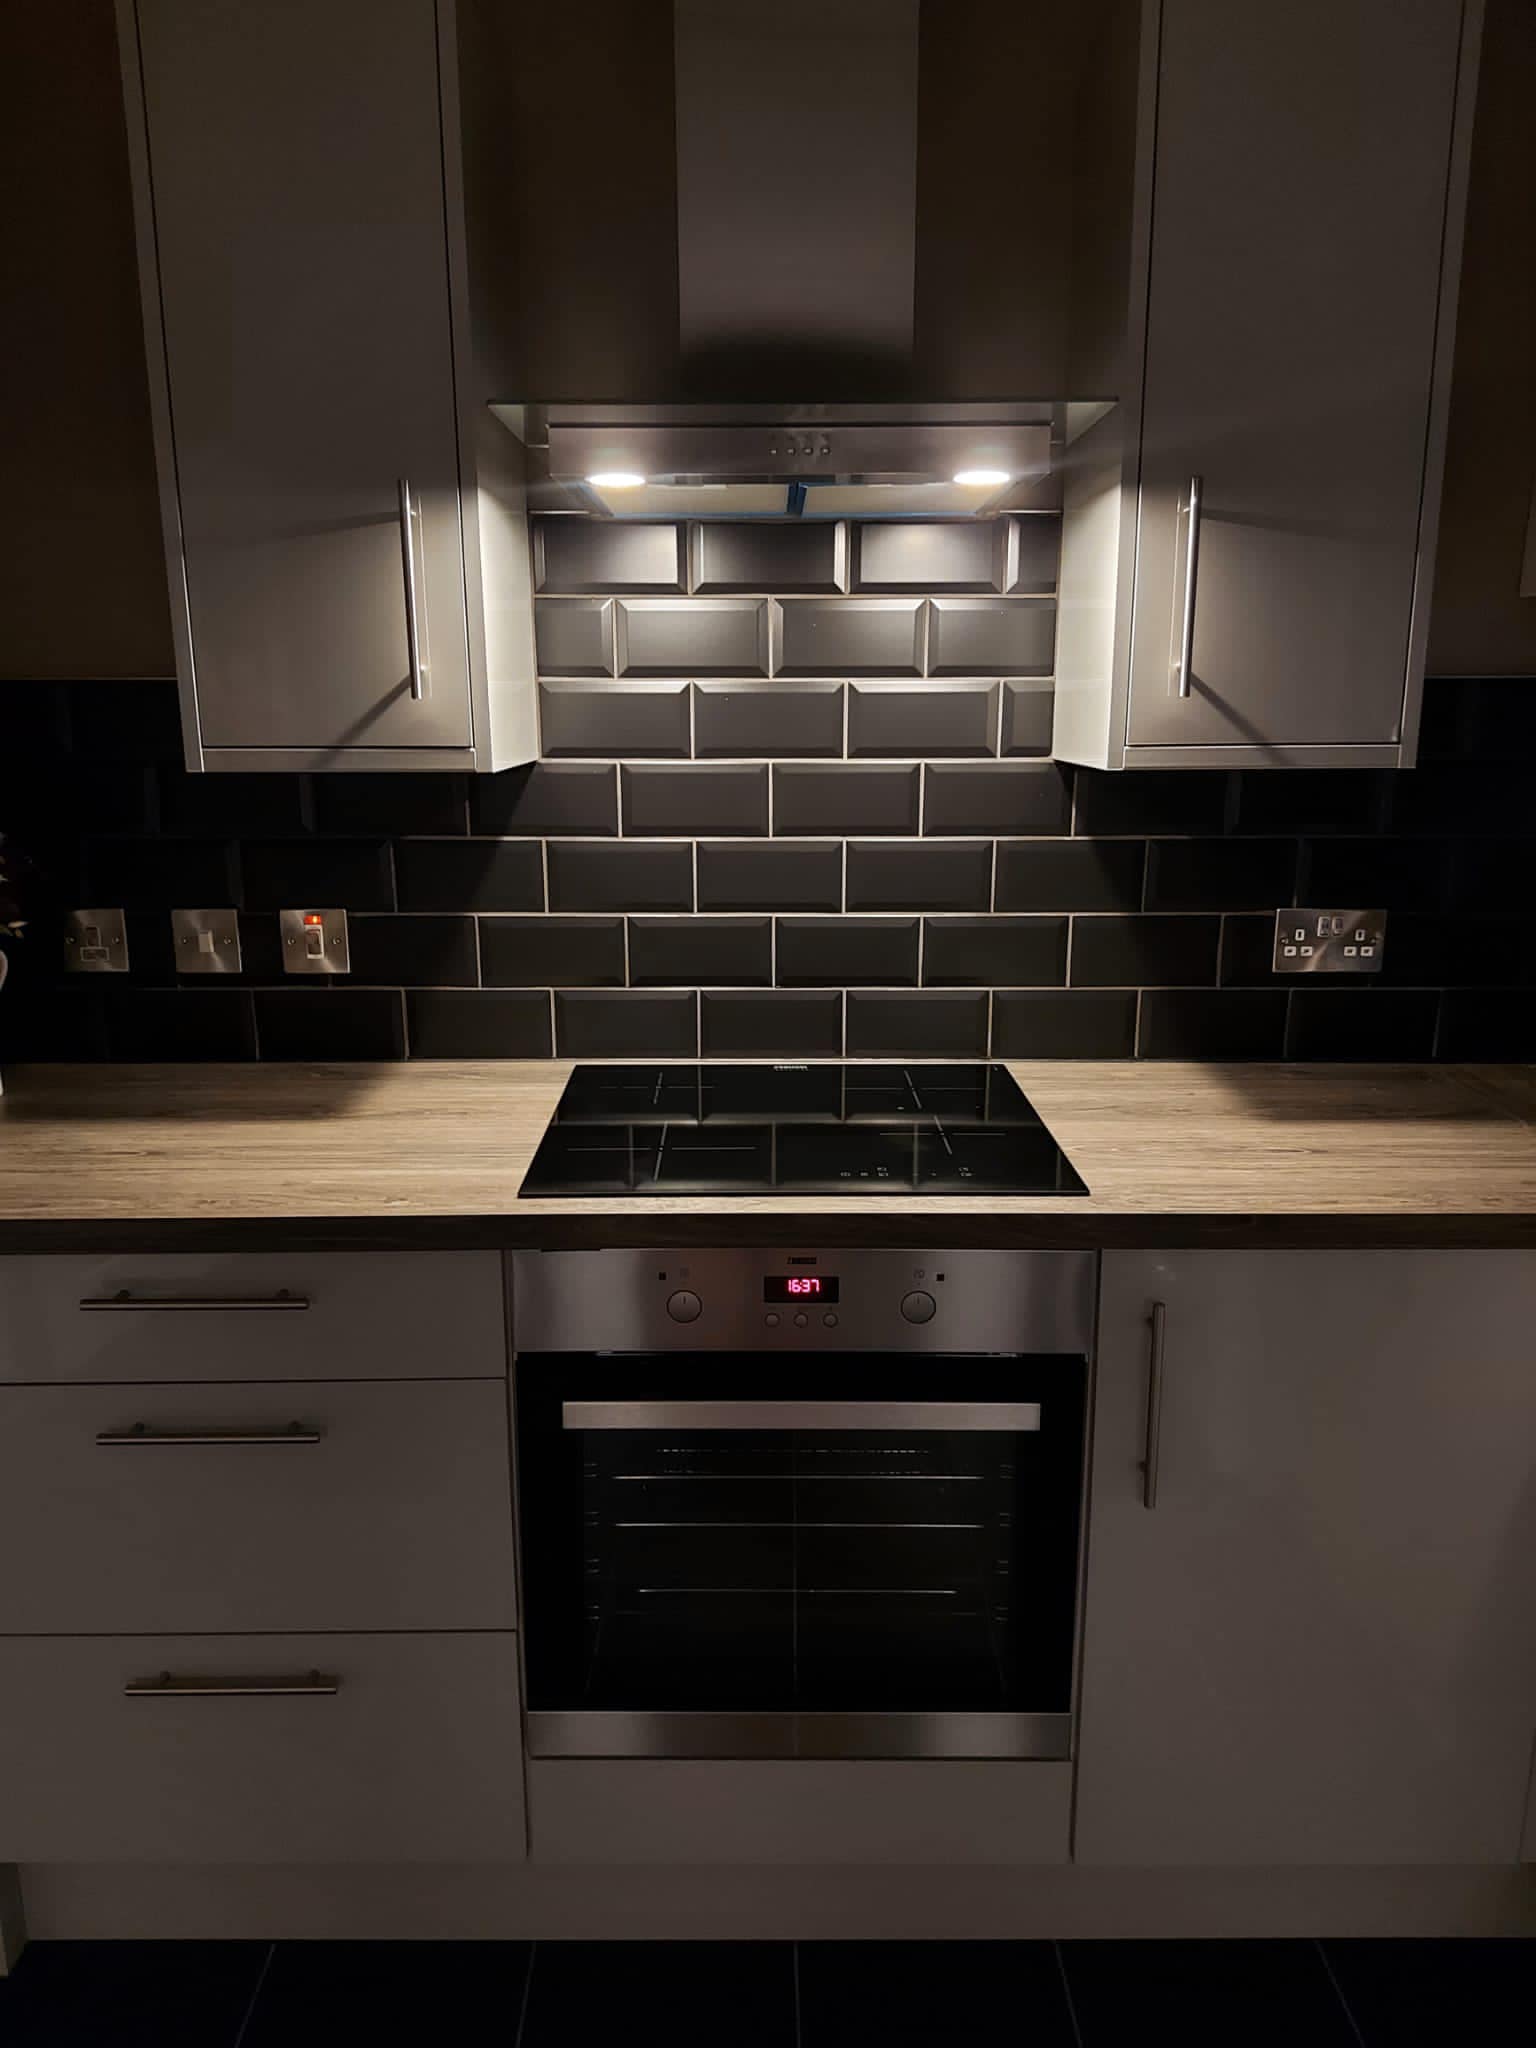 Kitchen work top with oven in the middle and LED lighting above